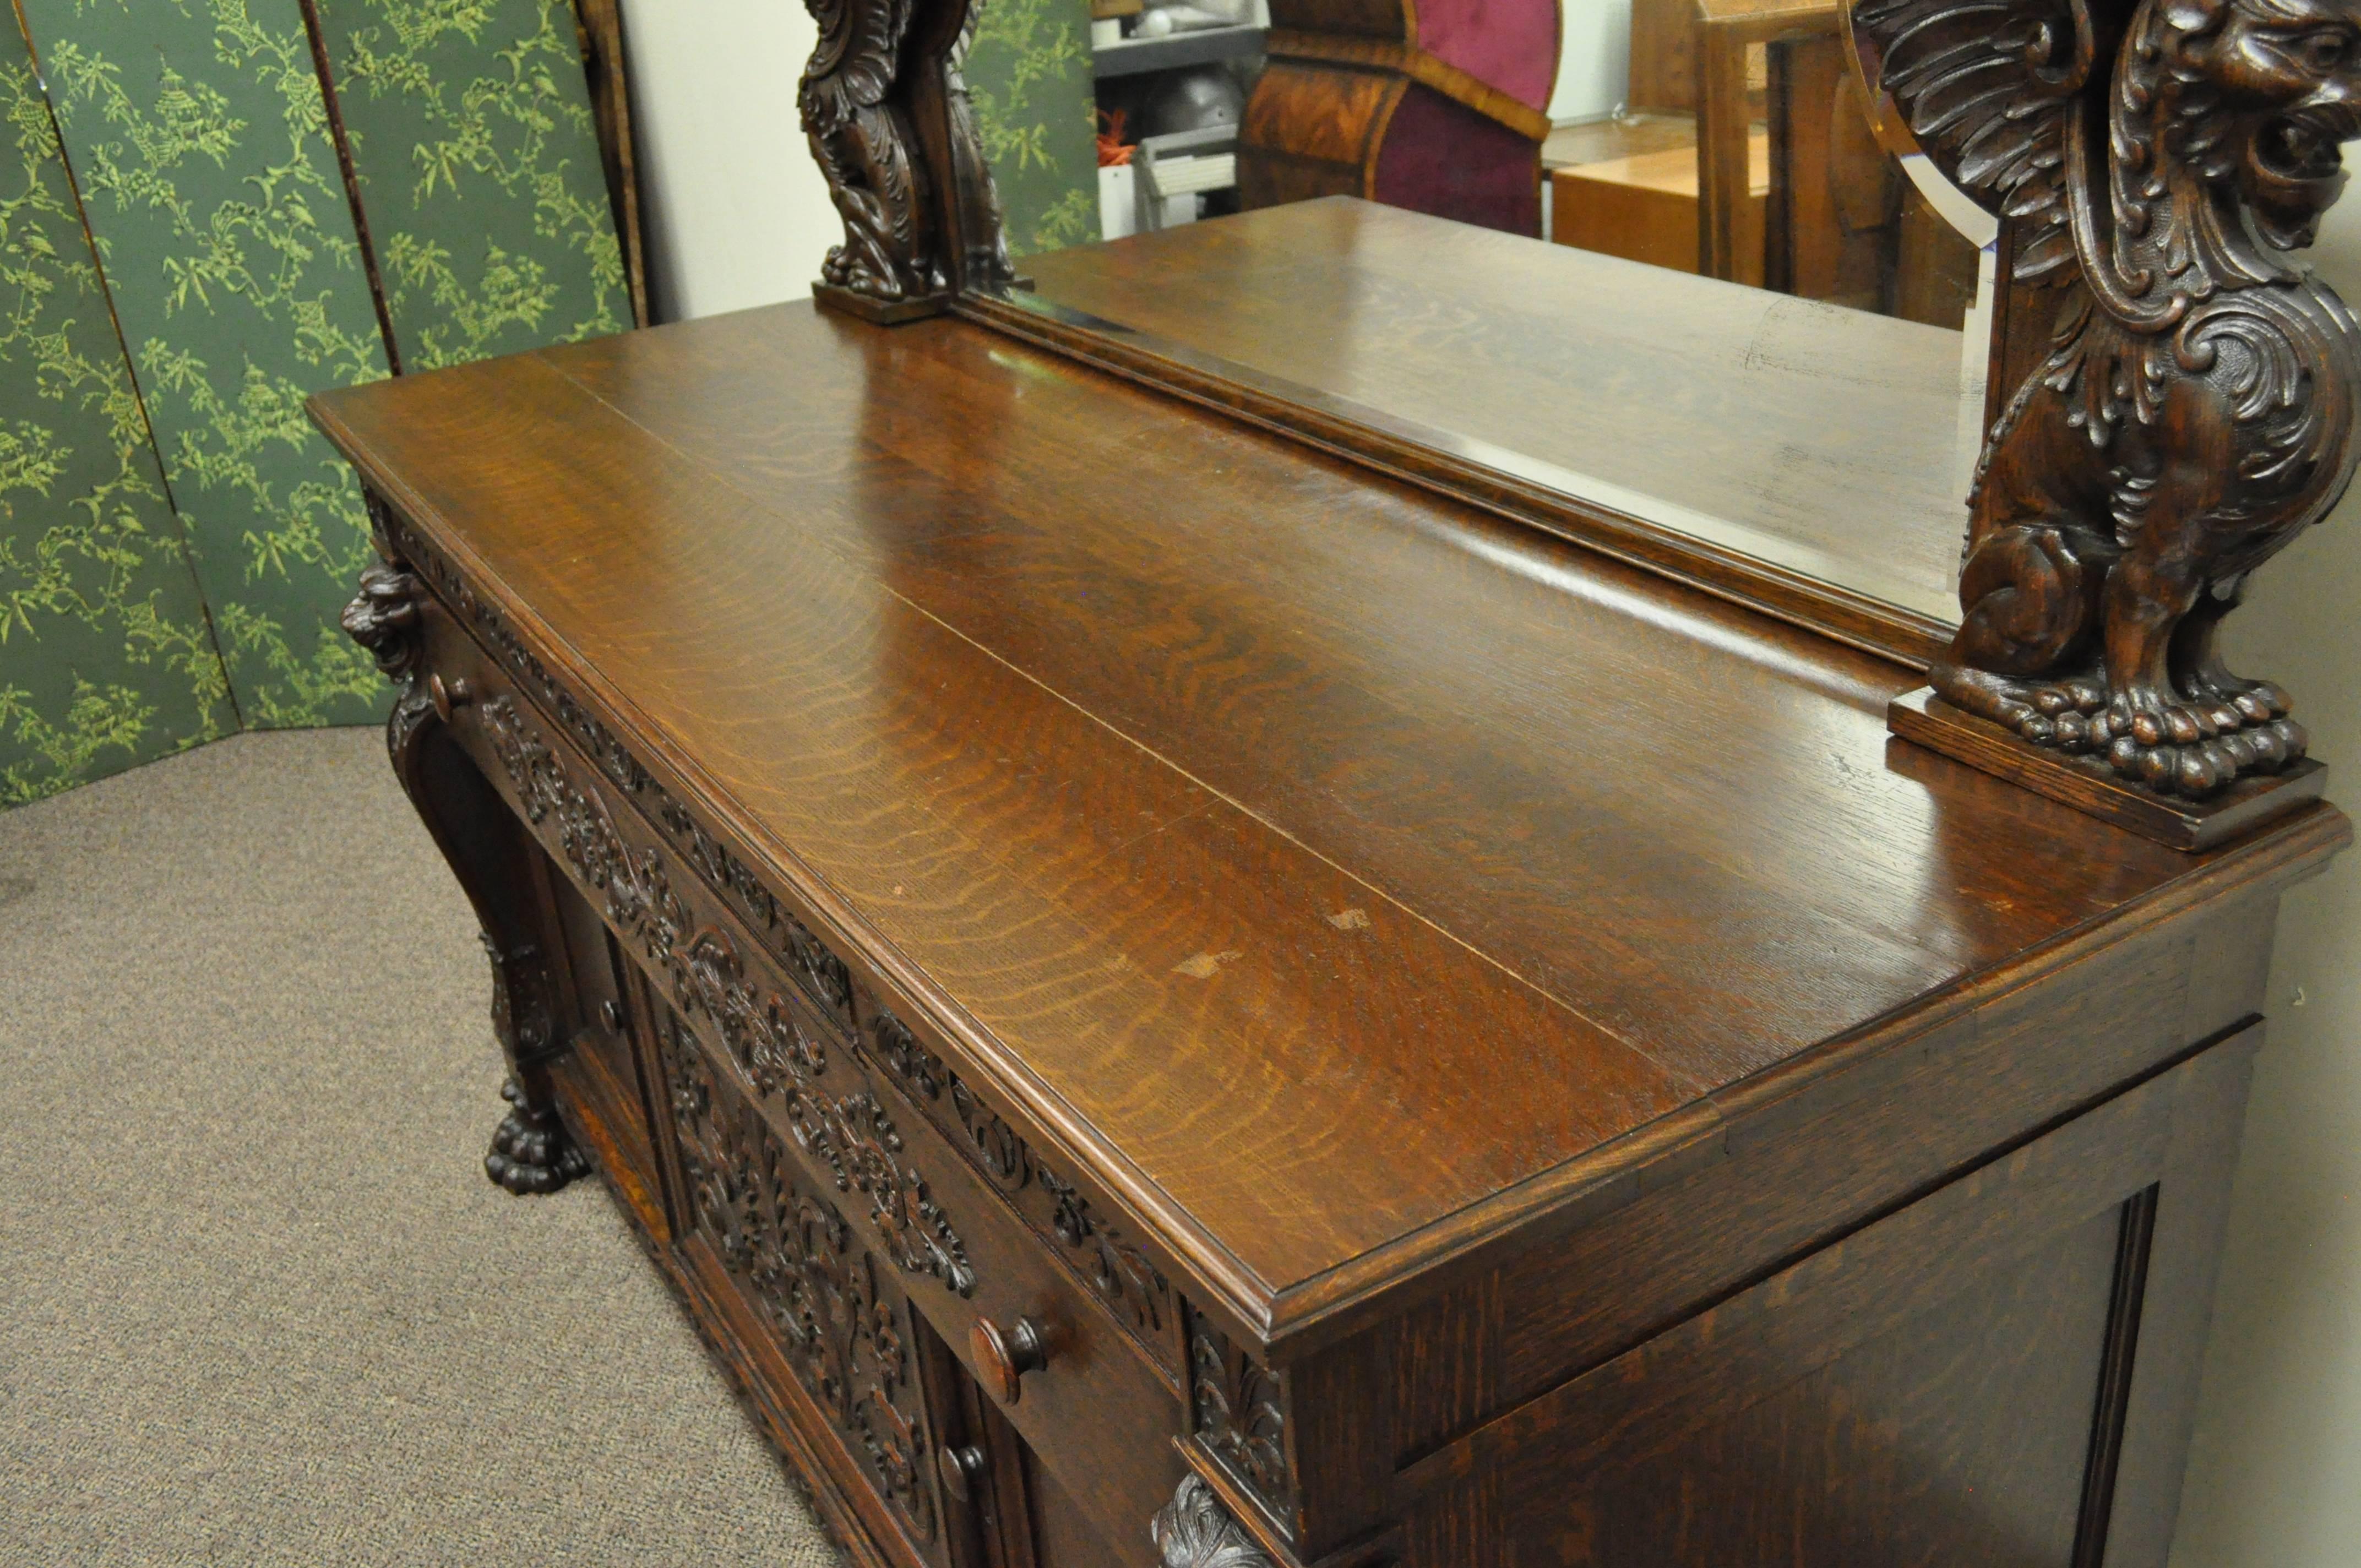 Beveled Victorian Oak Buffet Sideboard and Mirror with Lions and Griffins attr. Horner